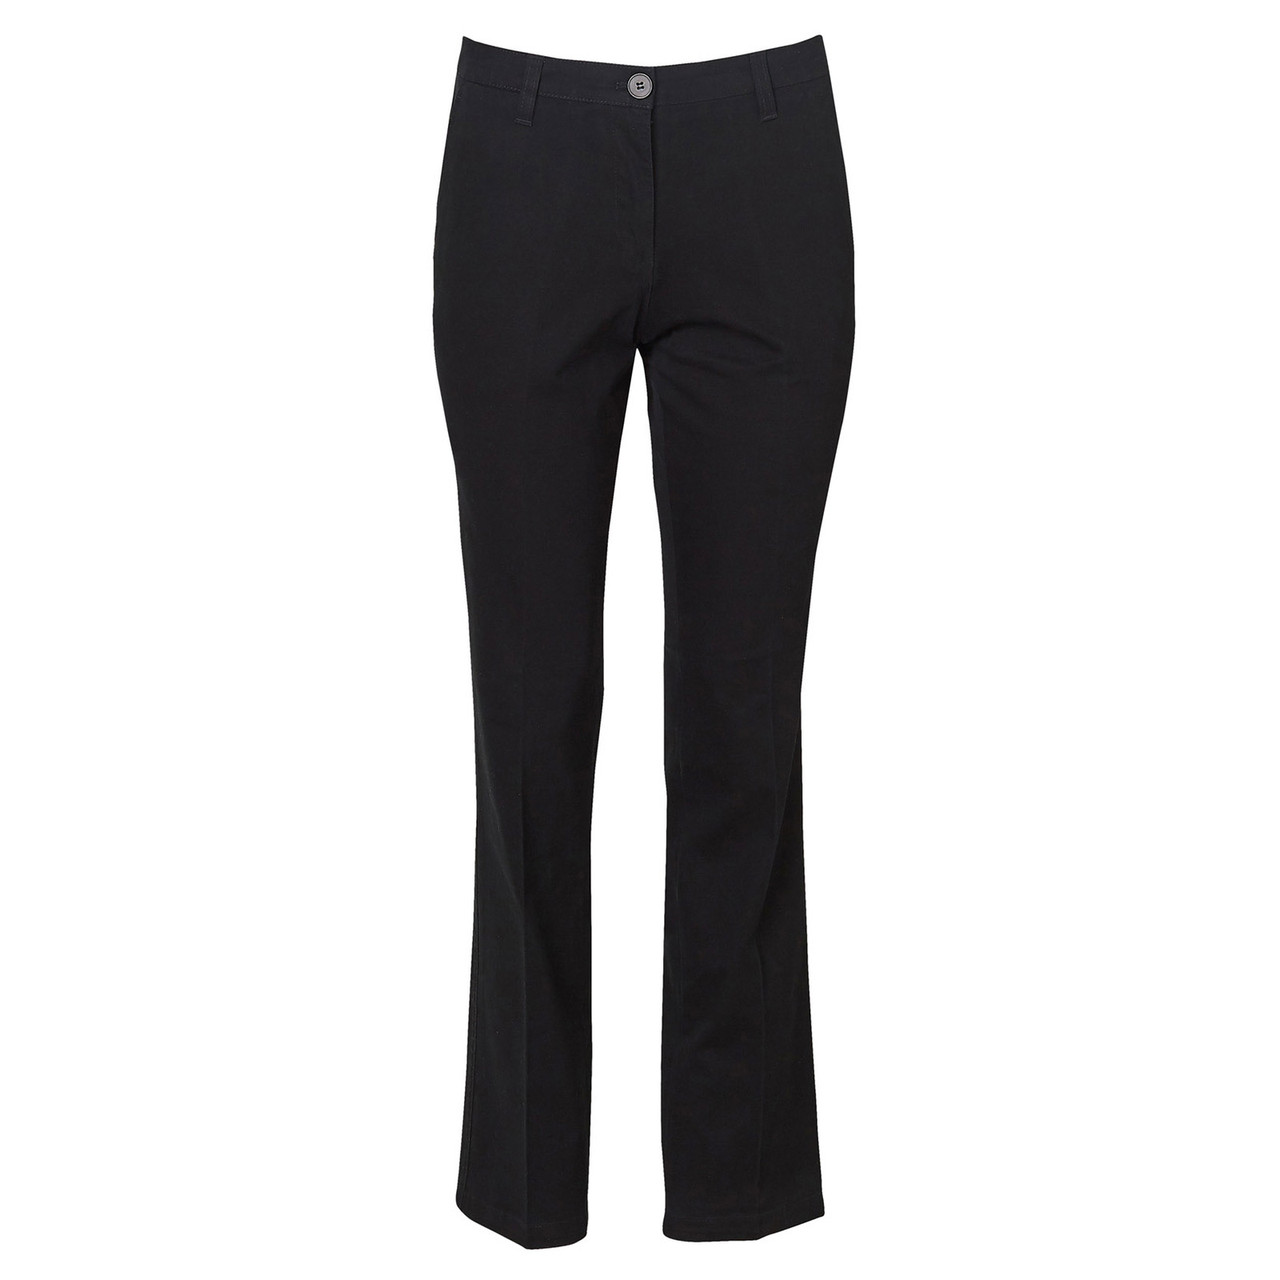 Shop Ladies Classic Fit Straight Chino Pants | Bulk Discount Clothing ...